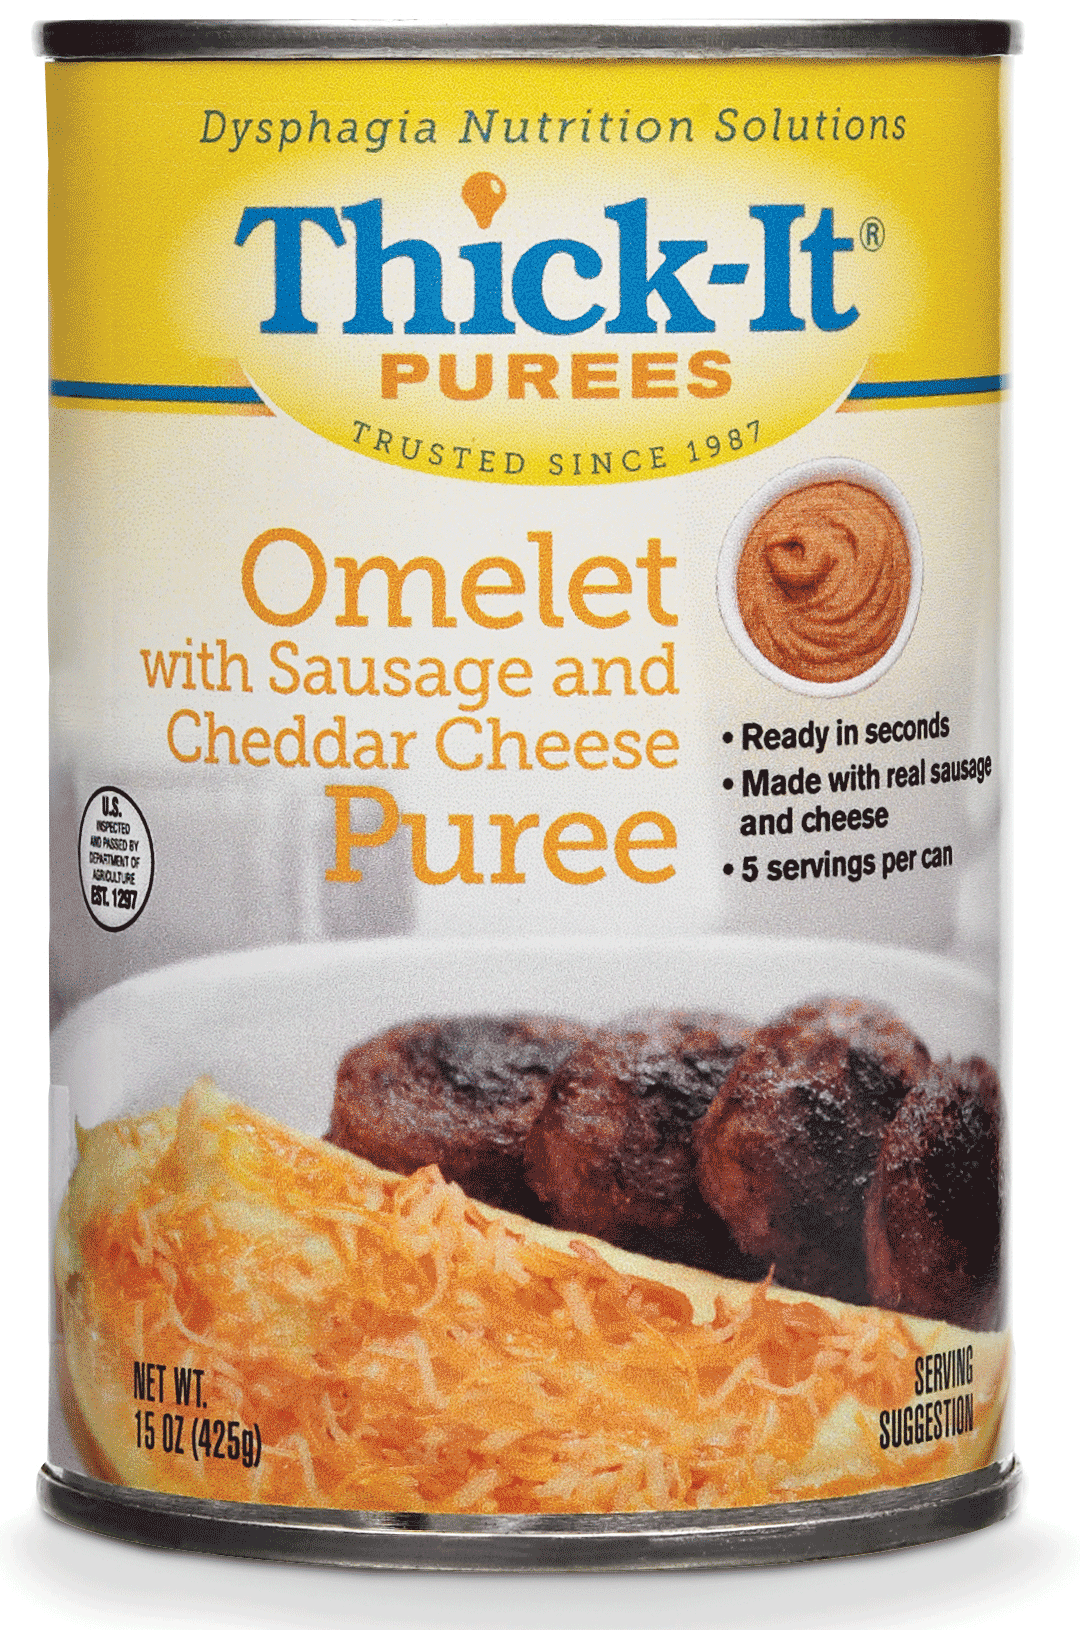 EA/1 - Thick-It Omelet with Sausage and Cheese Puree 15 oz. Can - Best Buy Medical Supplies